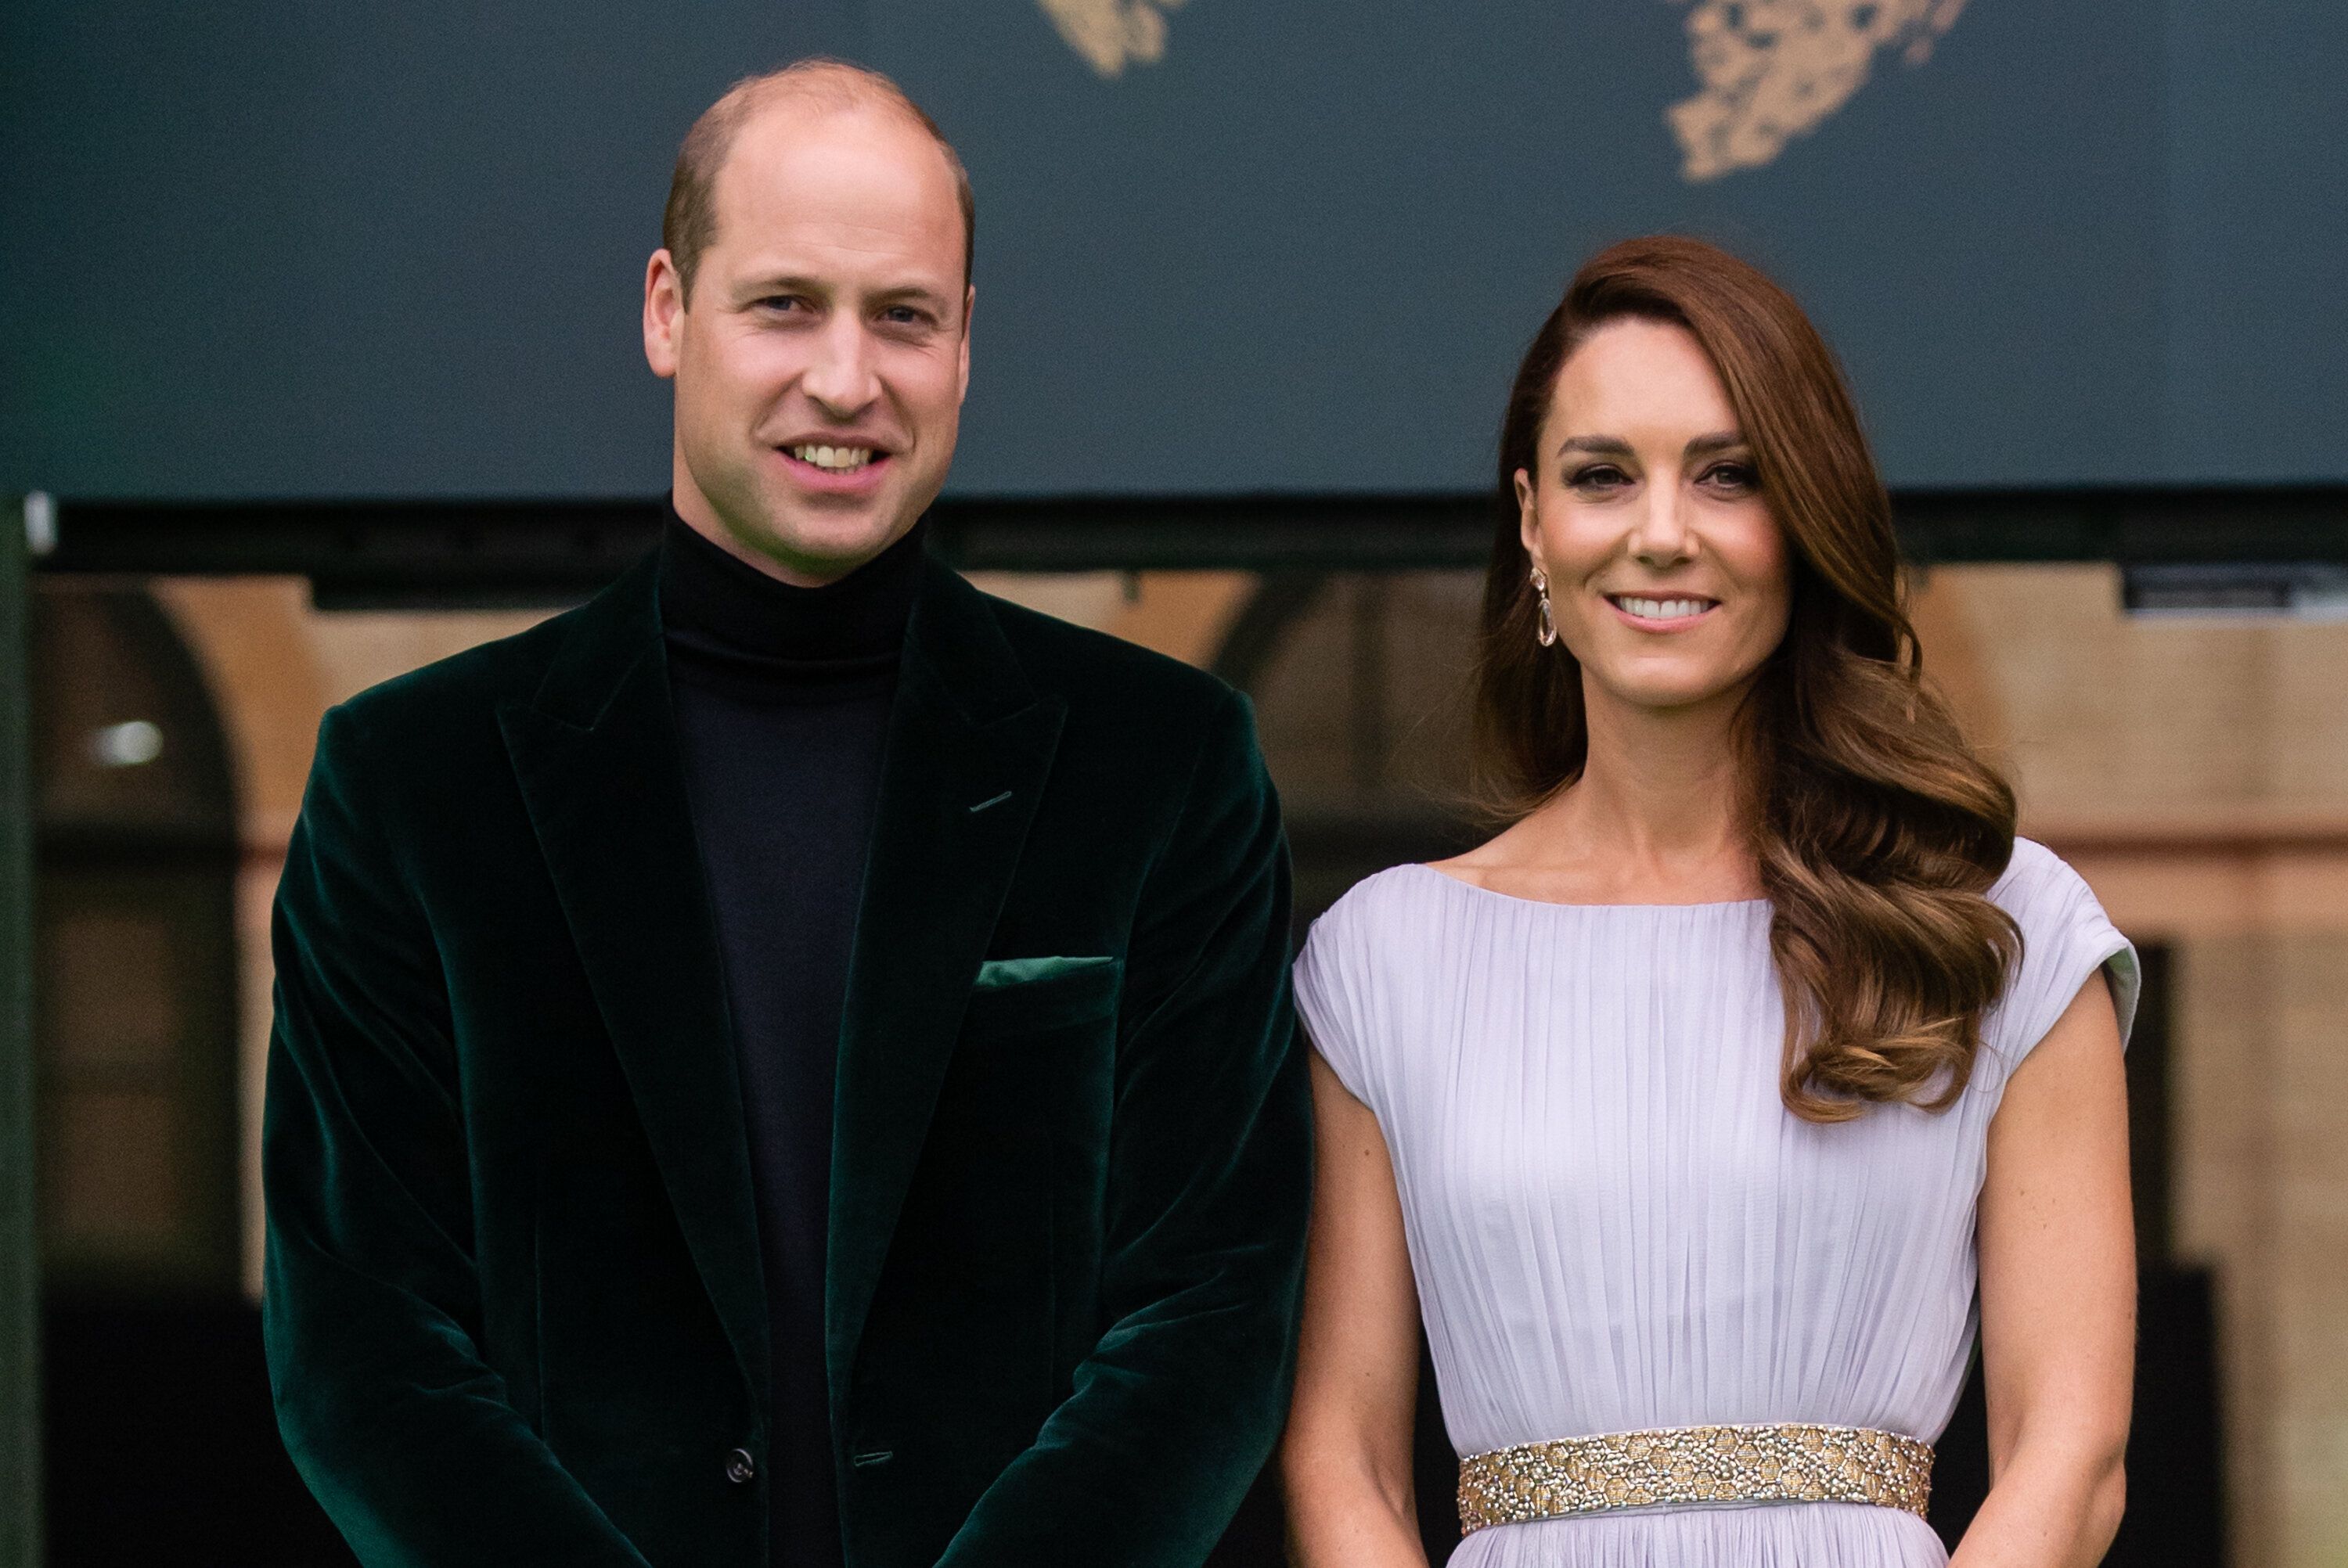 The Earthshot prize was started by the Duke of Cambridge.